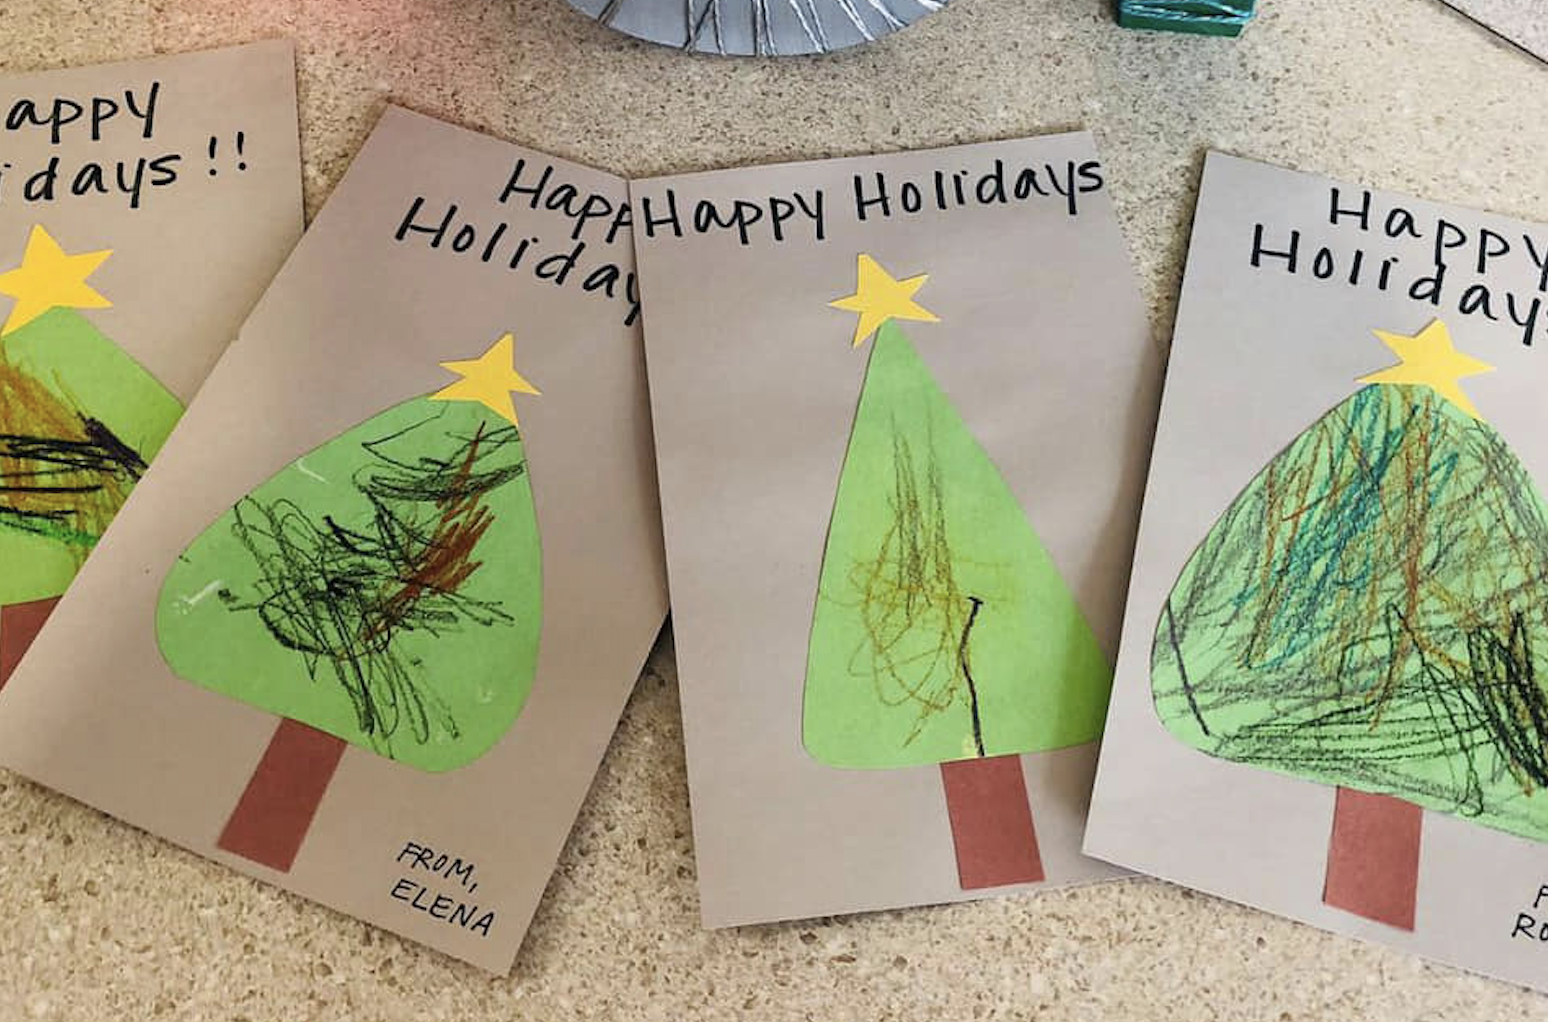 Christmas cards made by kids